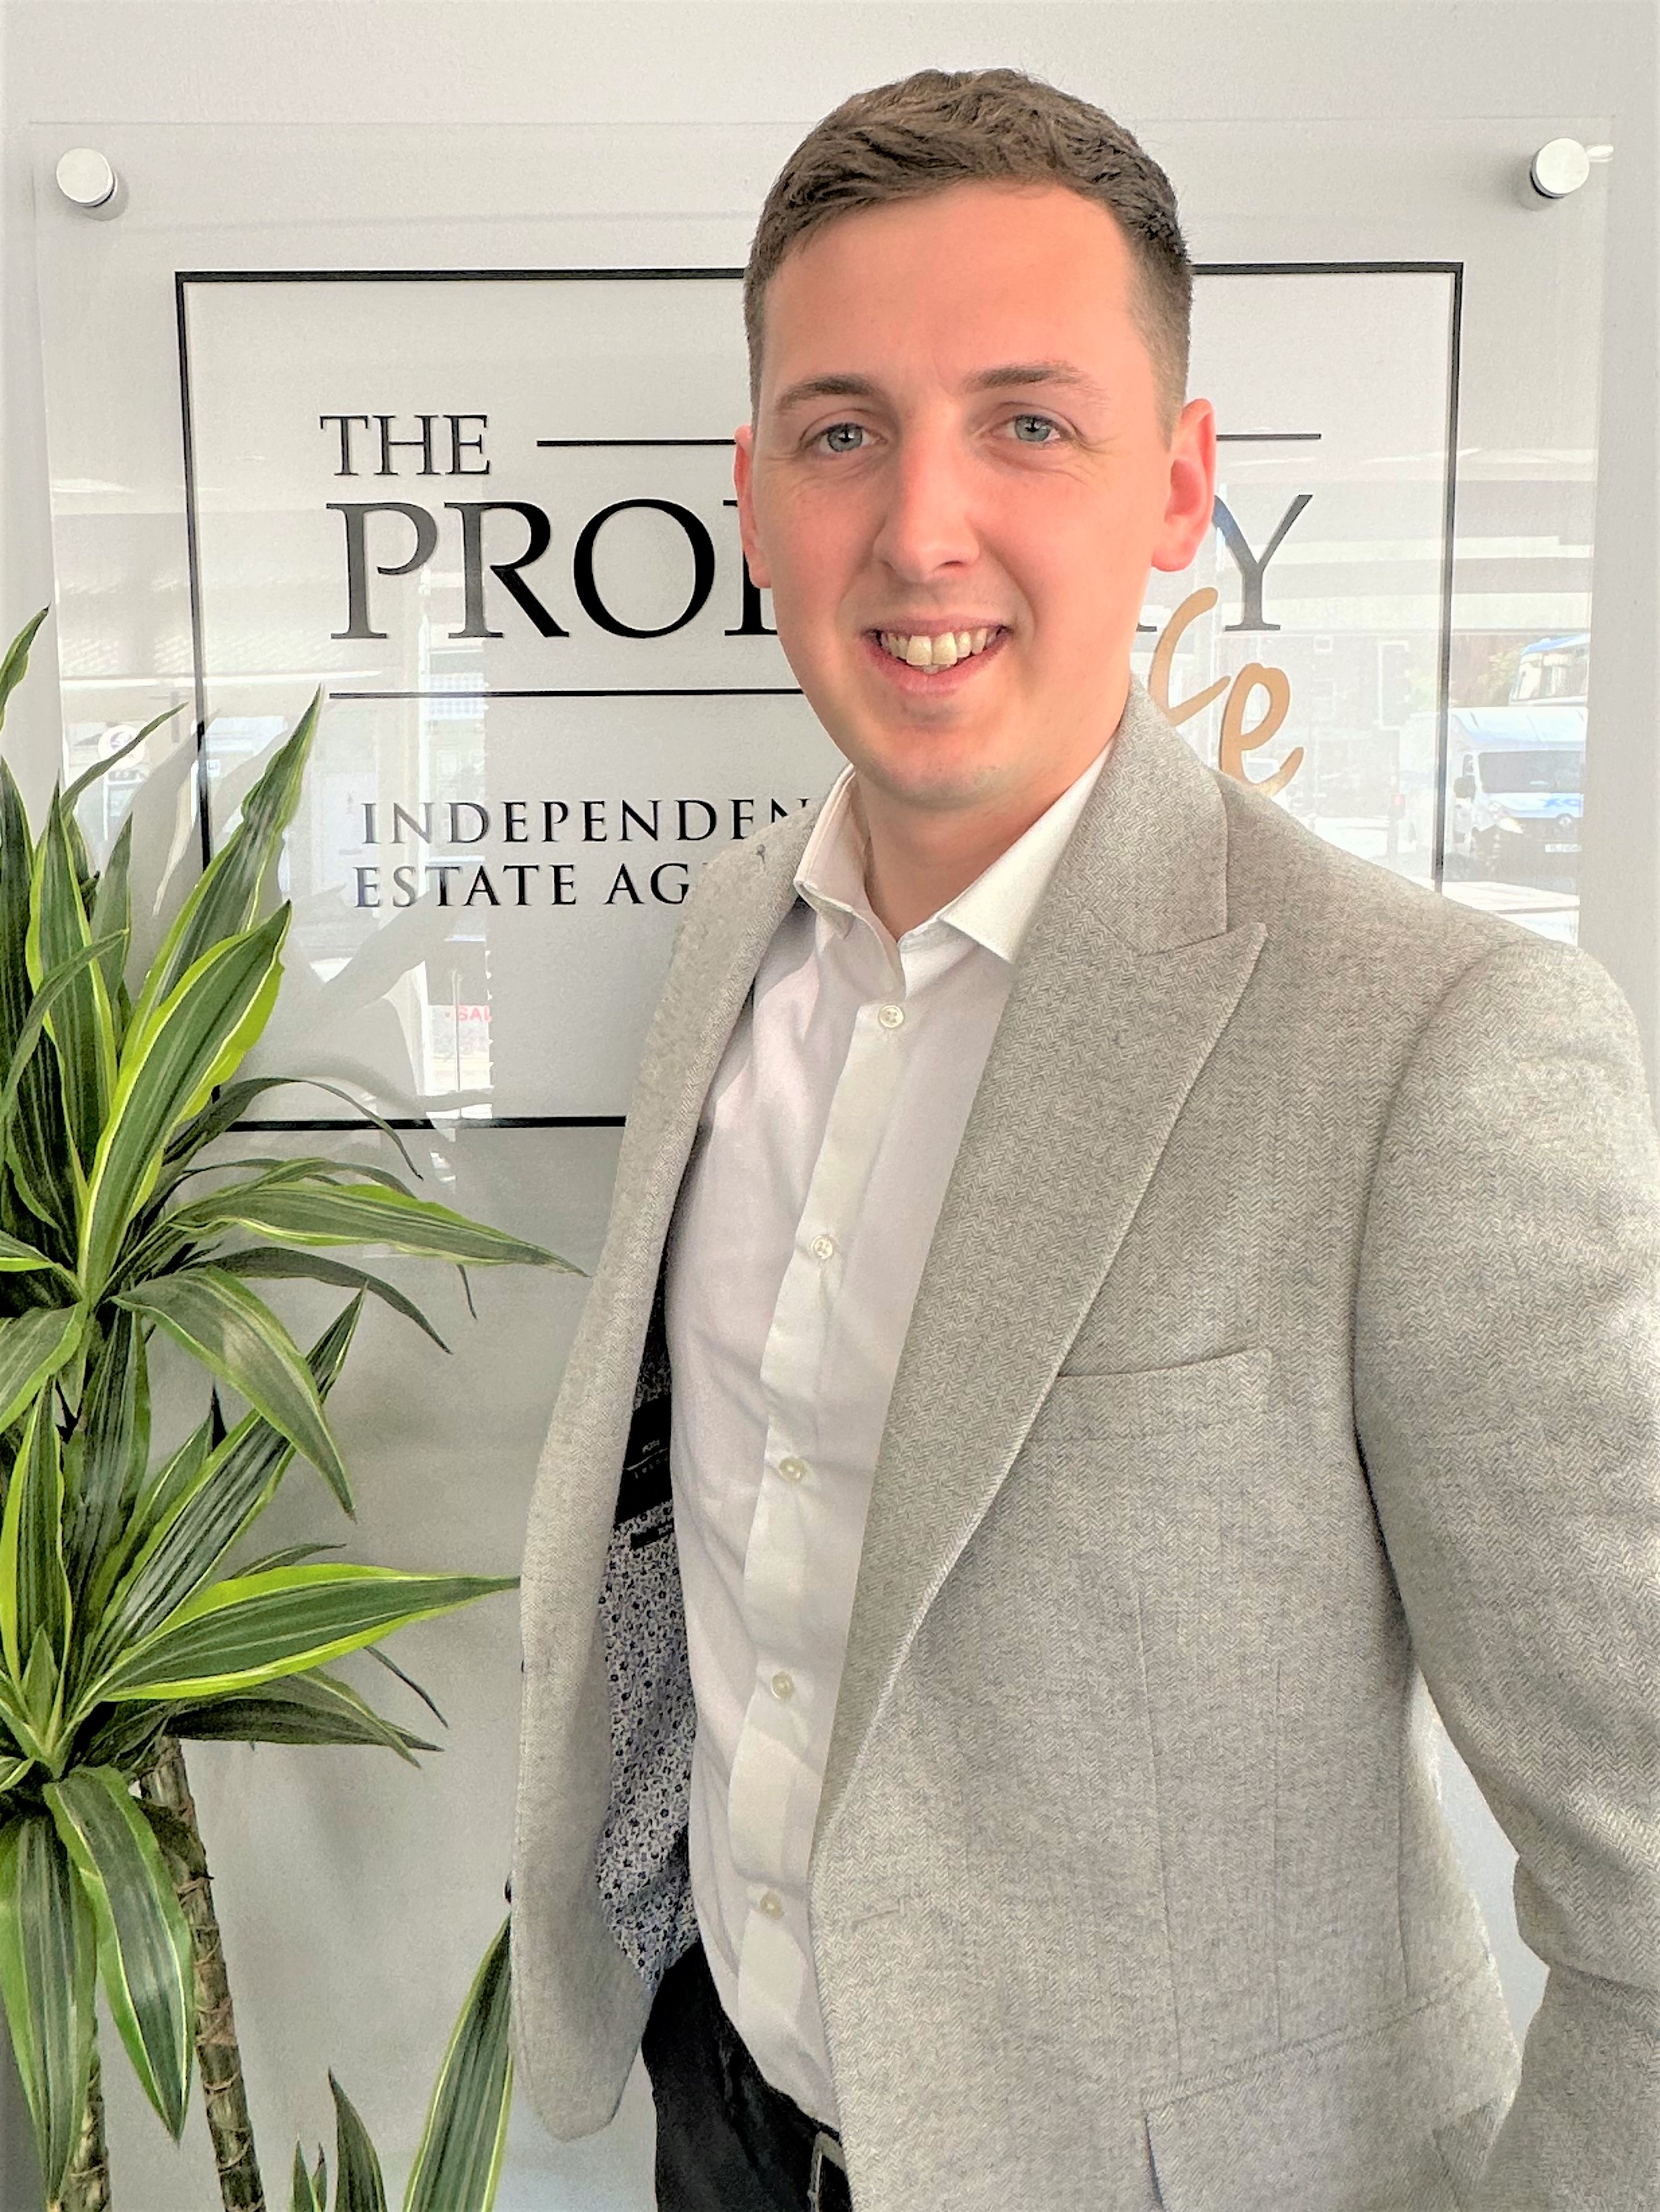 Dominic Purton, Sales Manager